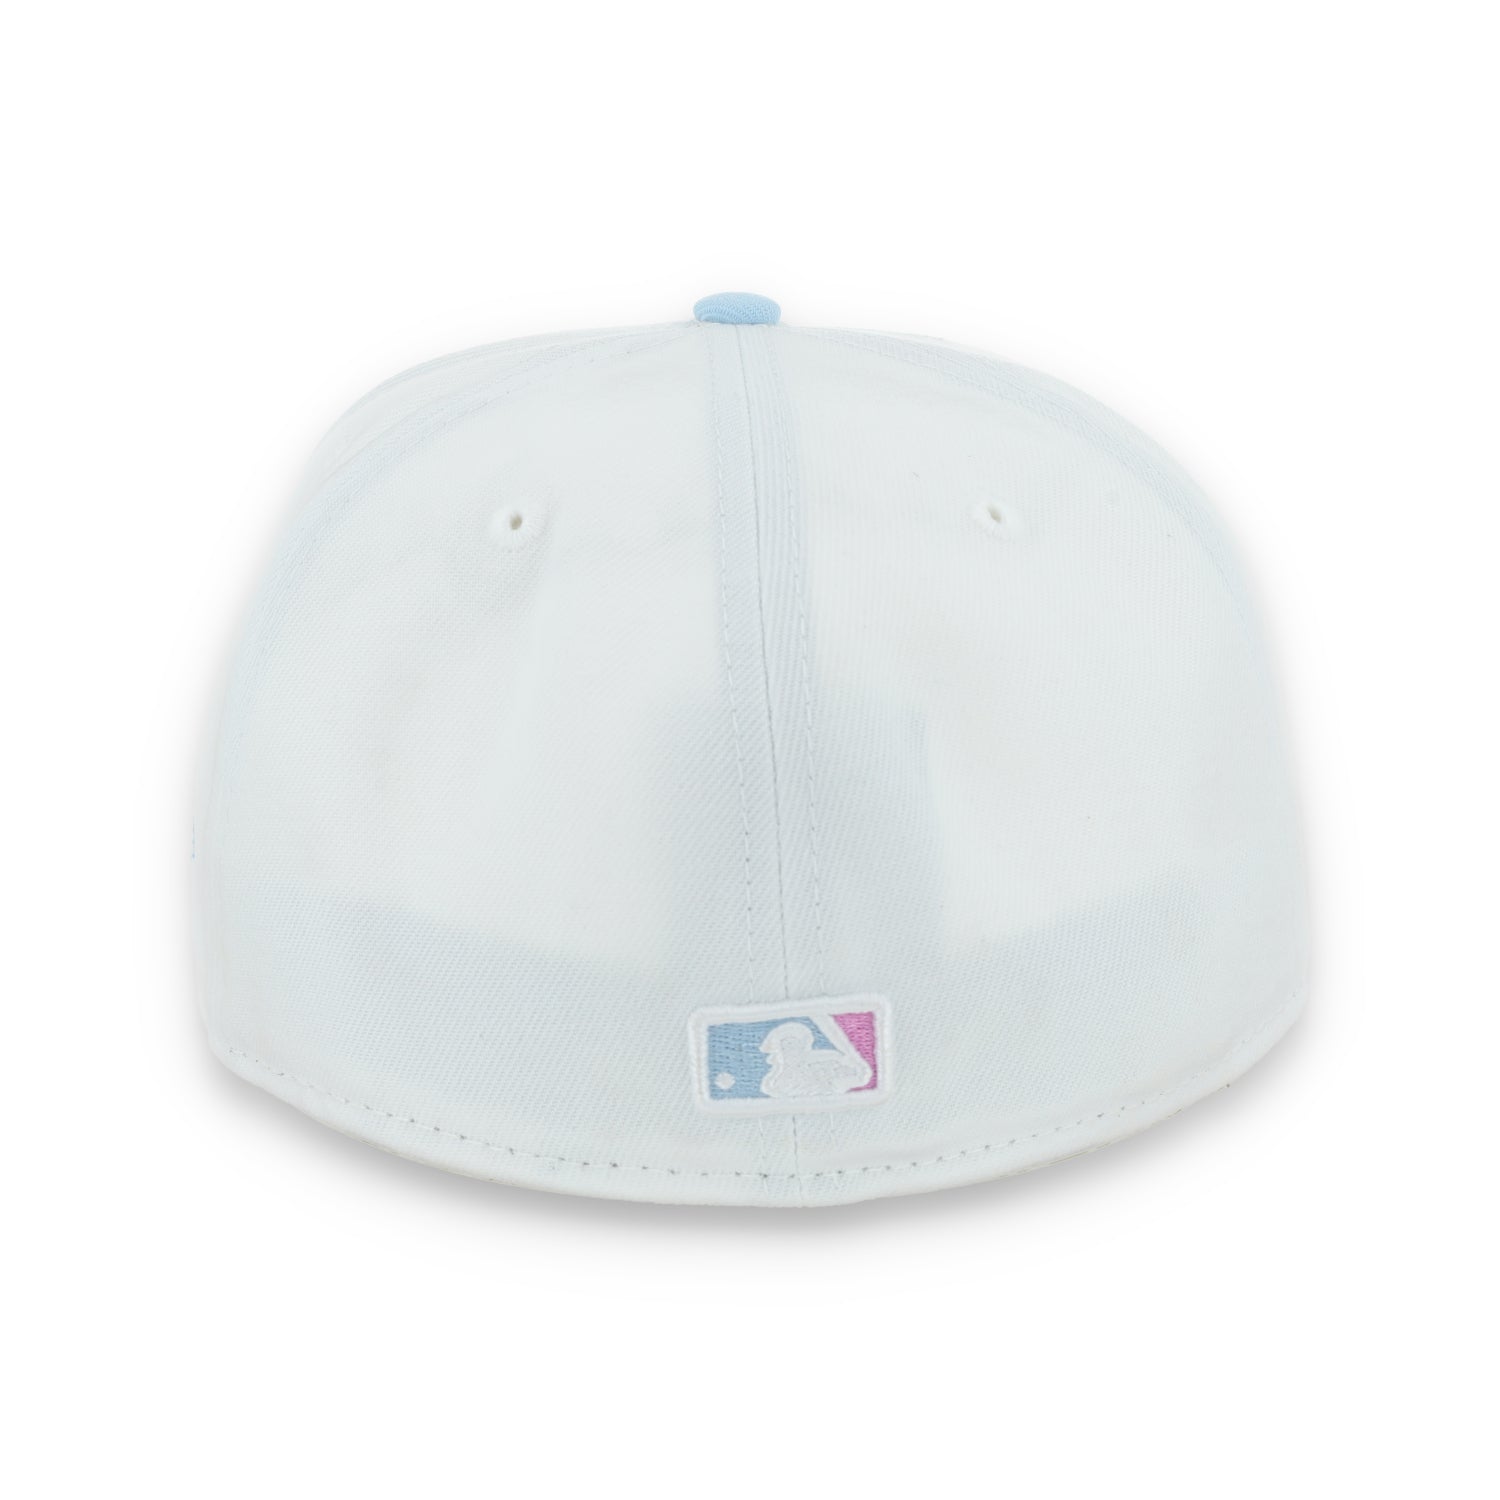 New Era Boston Red Sox Color Pack 59FIFTY Fitted Hat-White/Light Blue /Pink